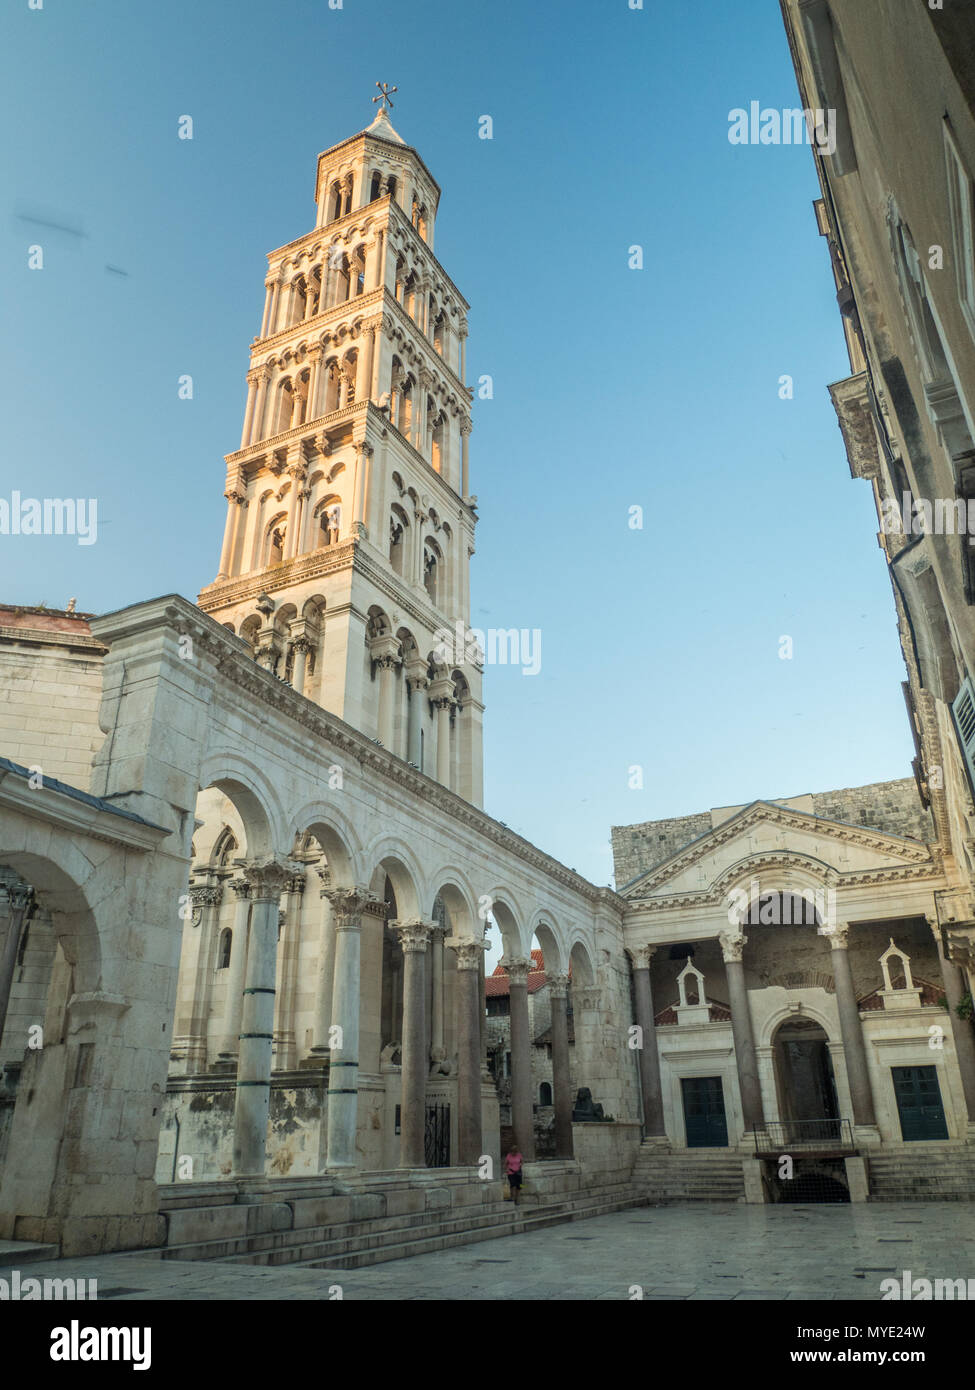 Peristil sqaure in Split, Croatia, former entry hall into Diocletian's Palace. Including the Bell Tower of the Cathedral of Saint Domnius. Stock Photo